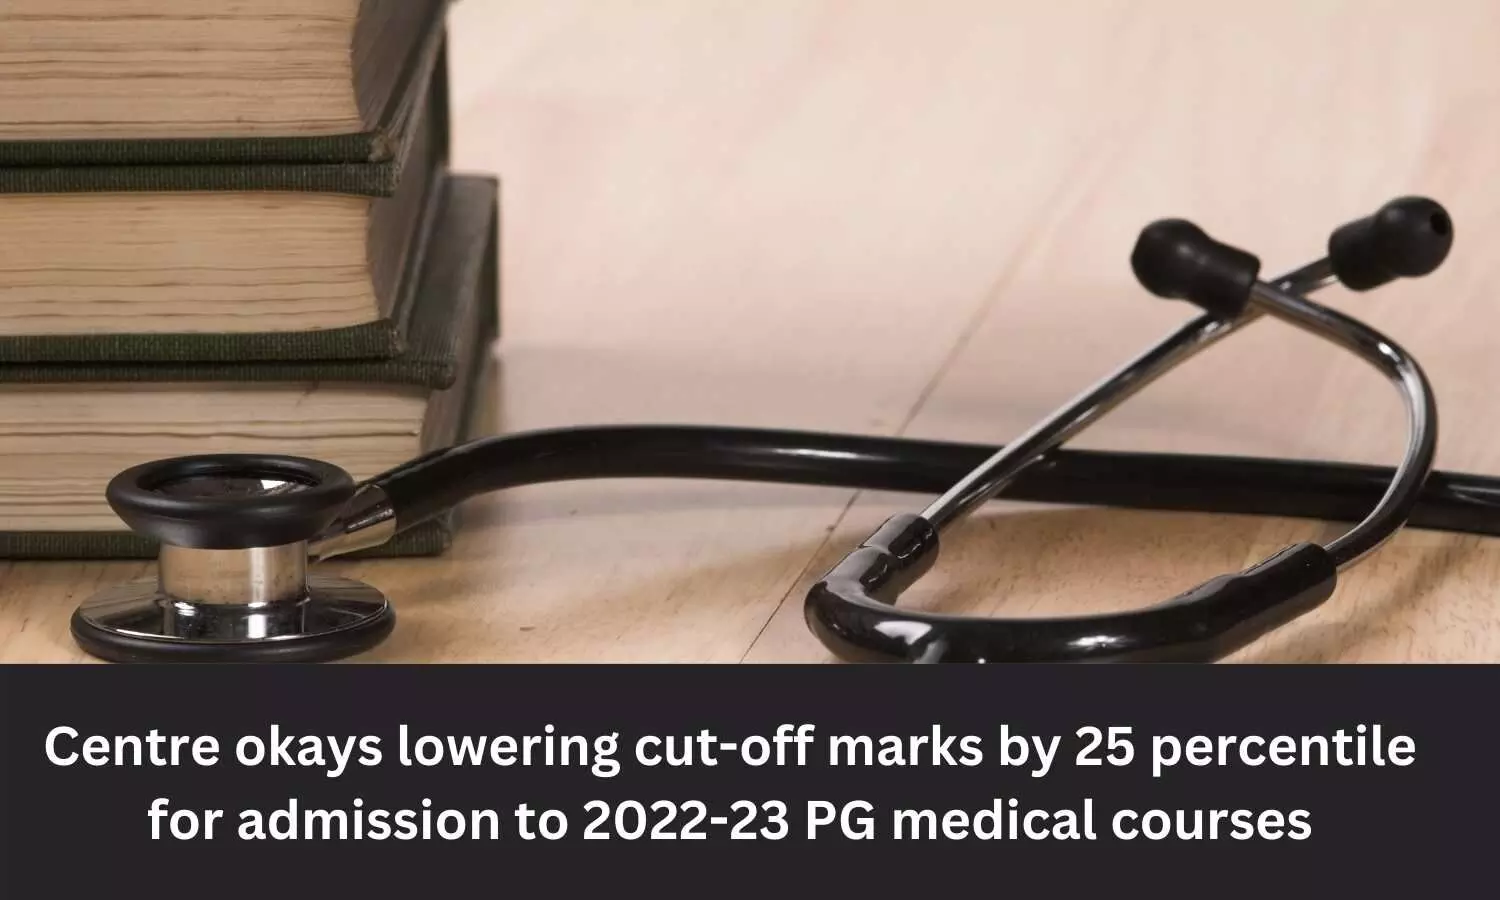 Centre okays lowering cut-off marks by 25 percentile for admission to 2022-23 PG medical courses